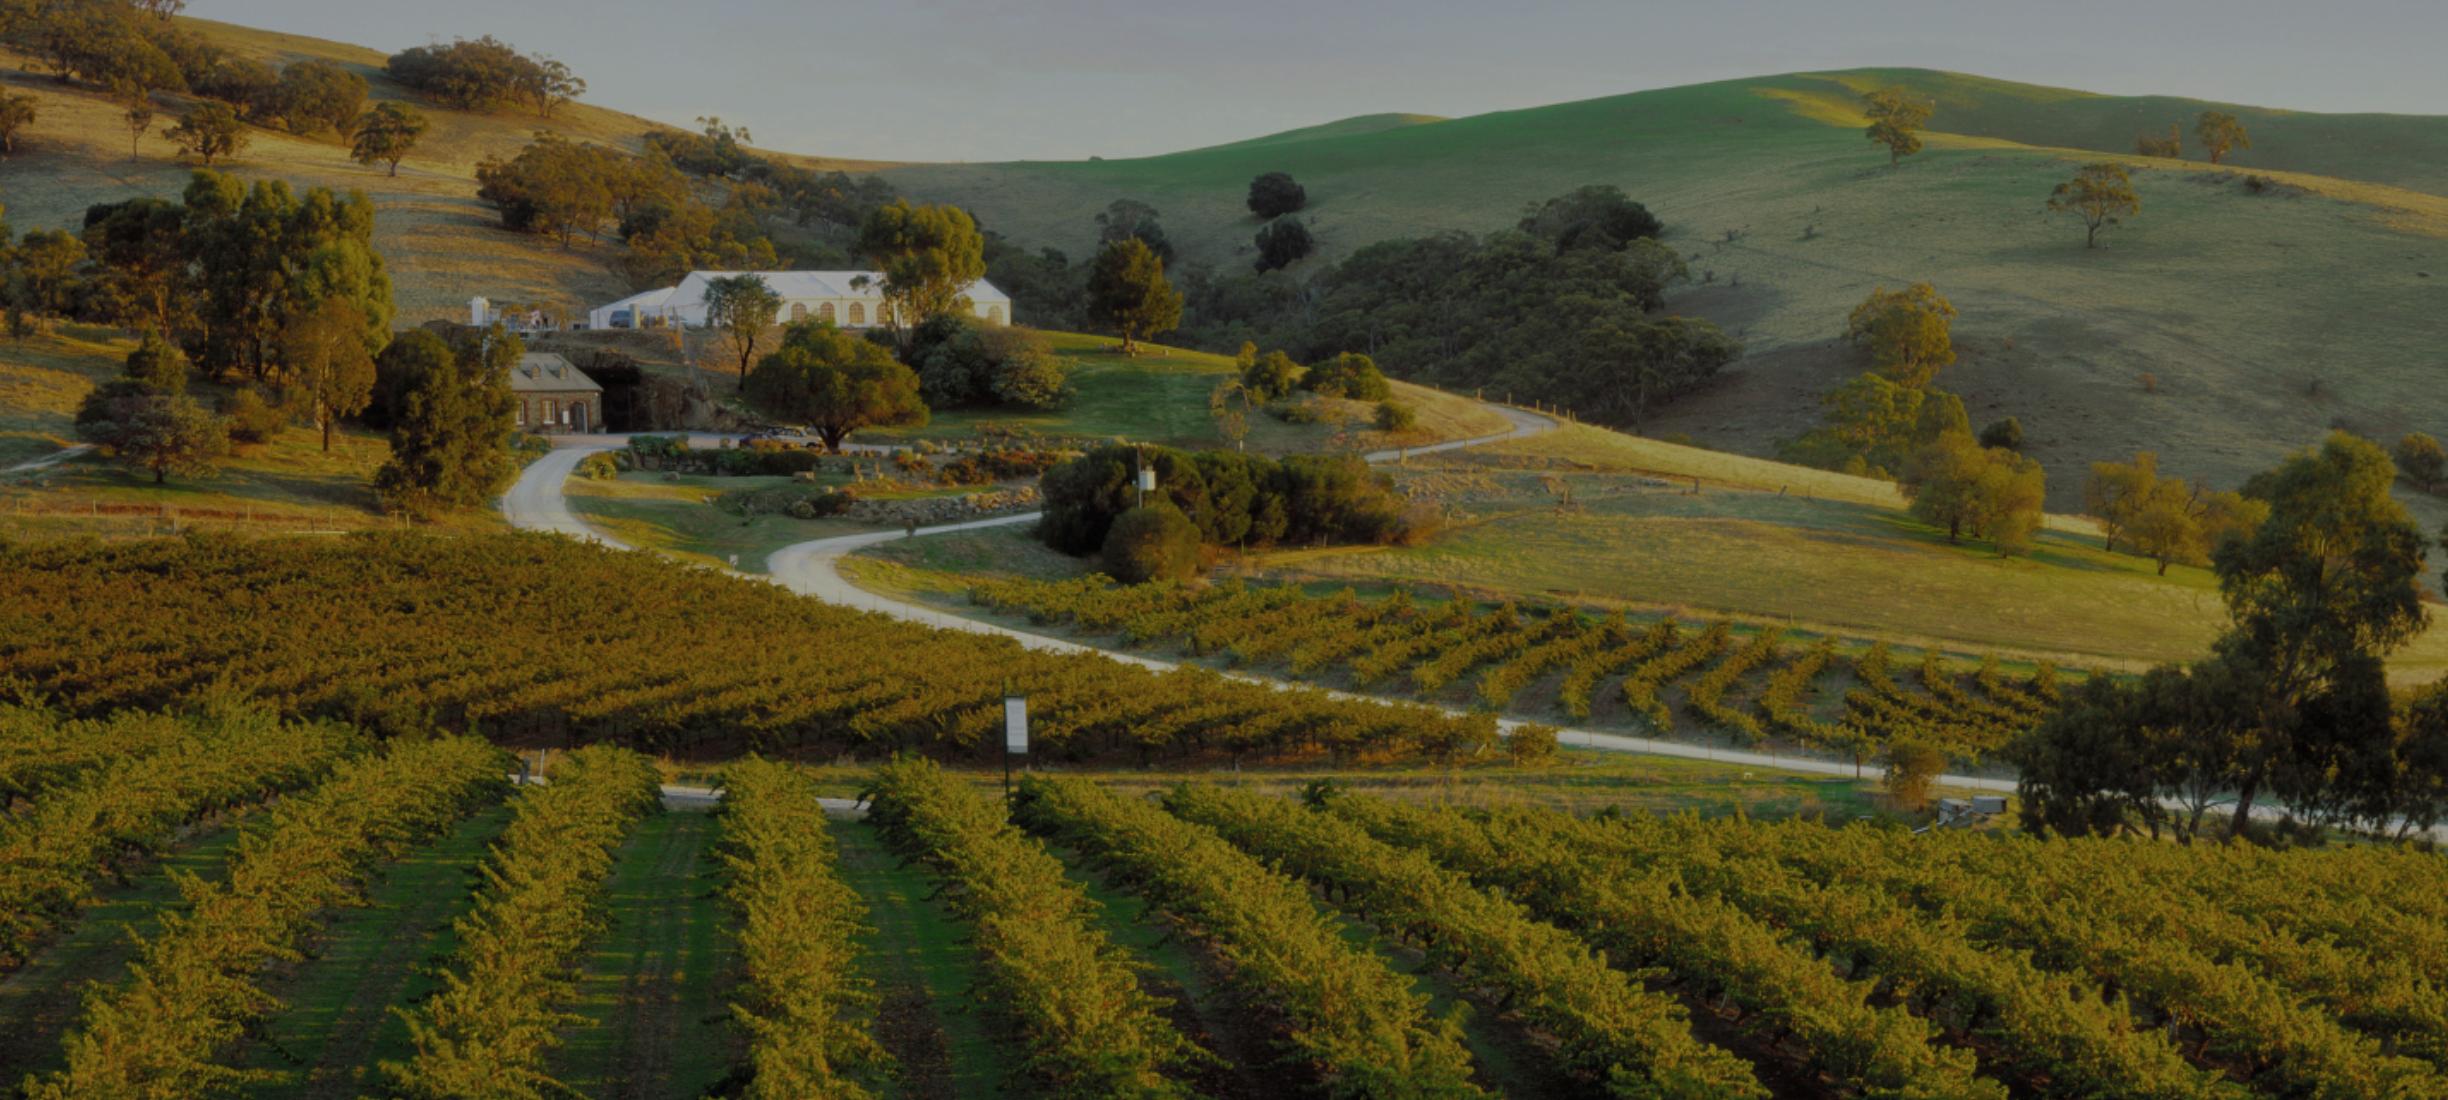 Luxury Escapes Guide to the Barossa